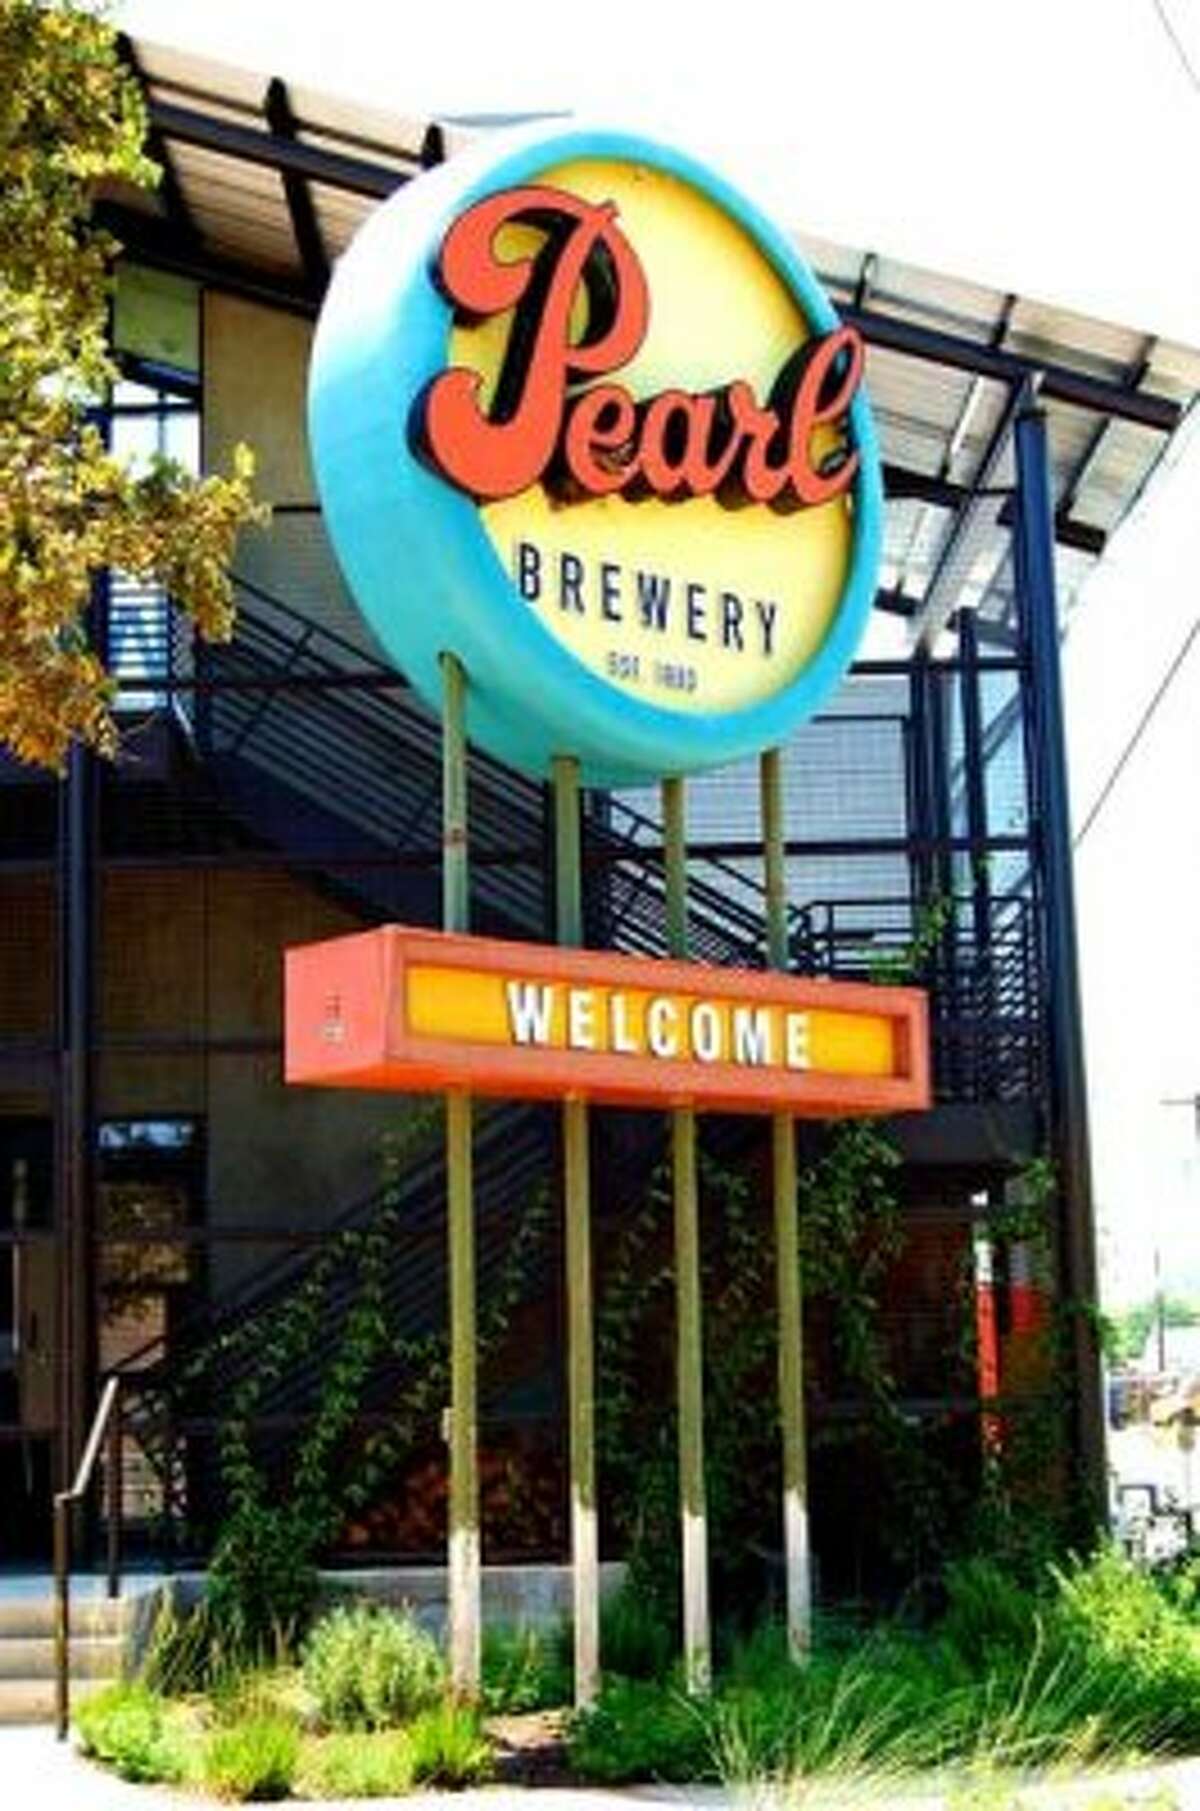 The Pearl Brewing Company (also known as the Pearl Brewery or just Pearl) was established in 1883.